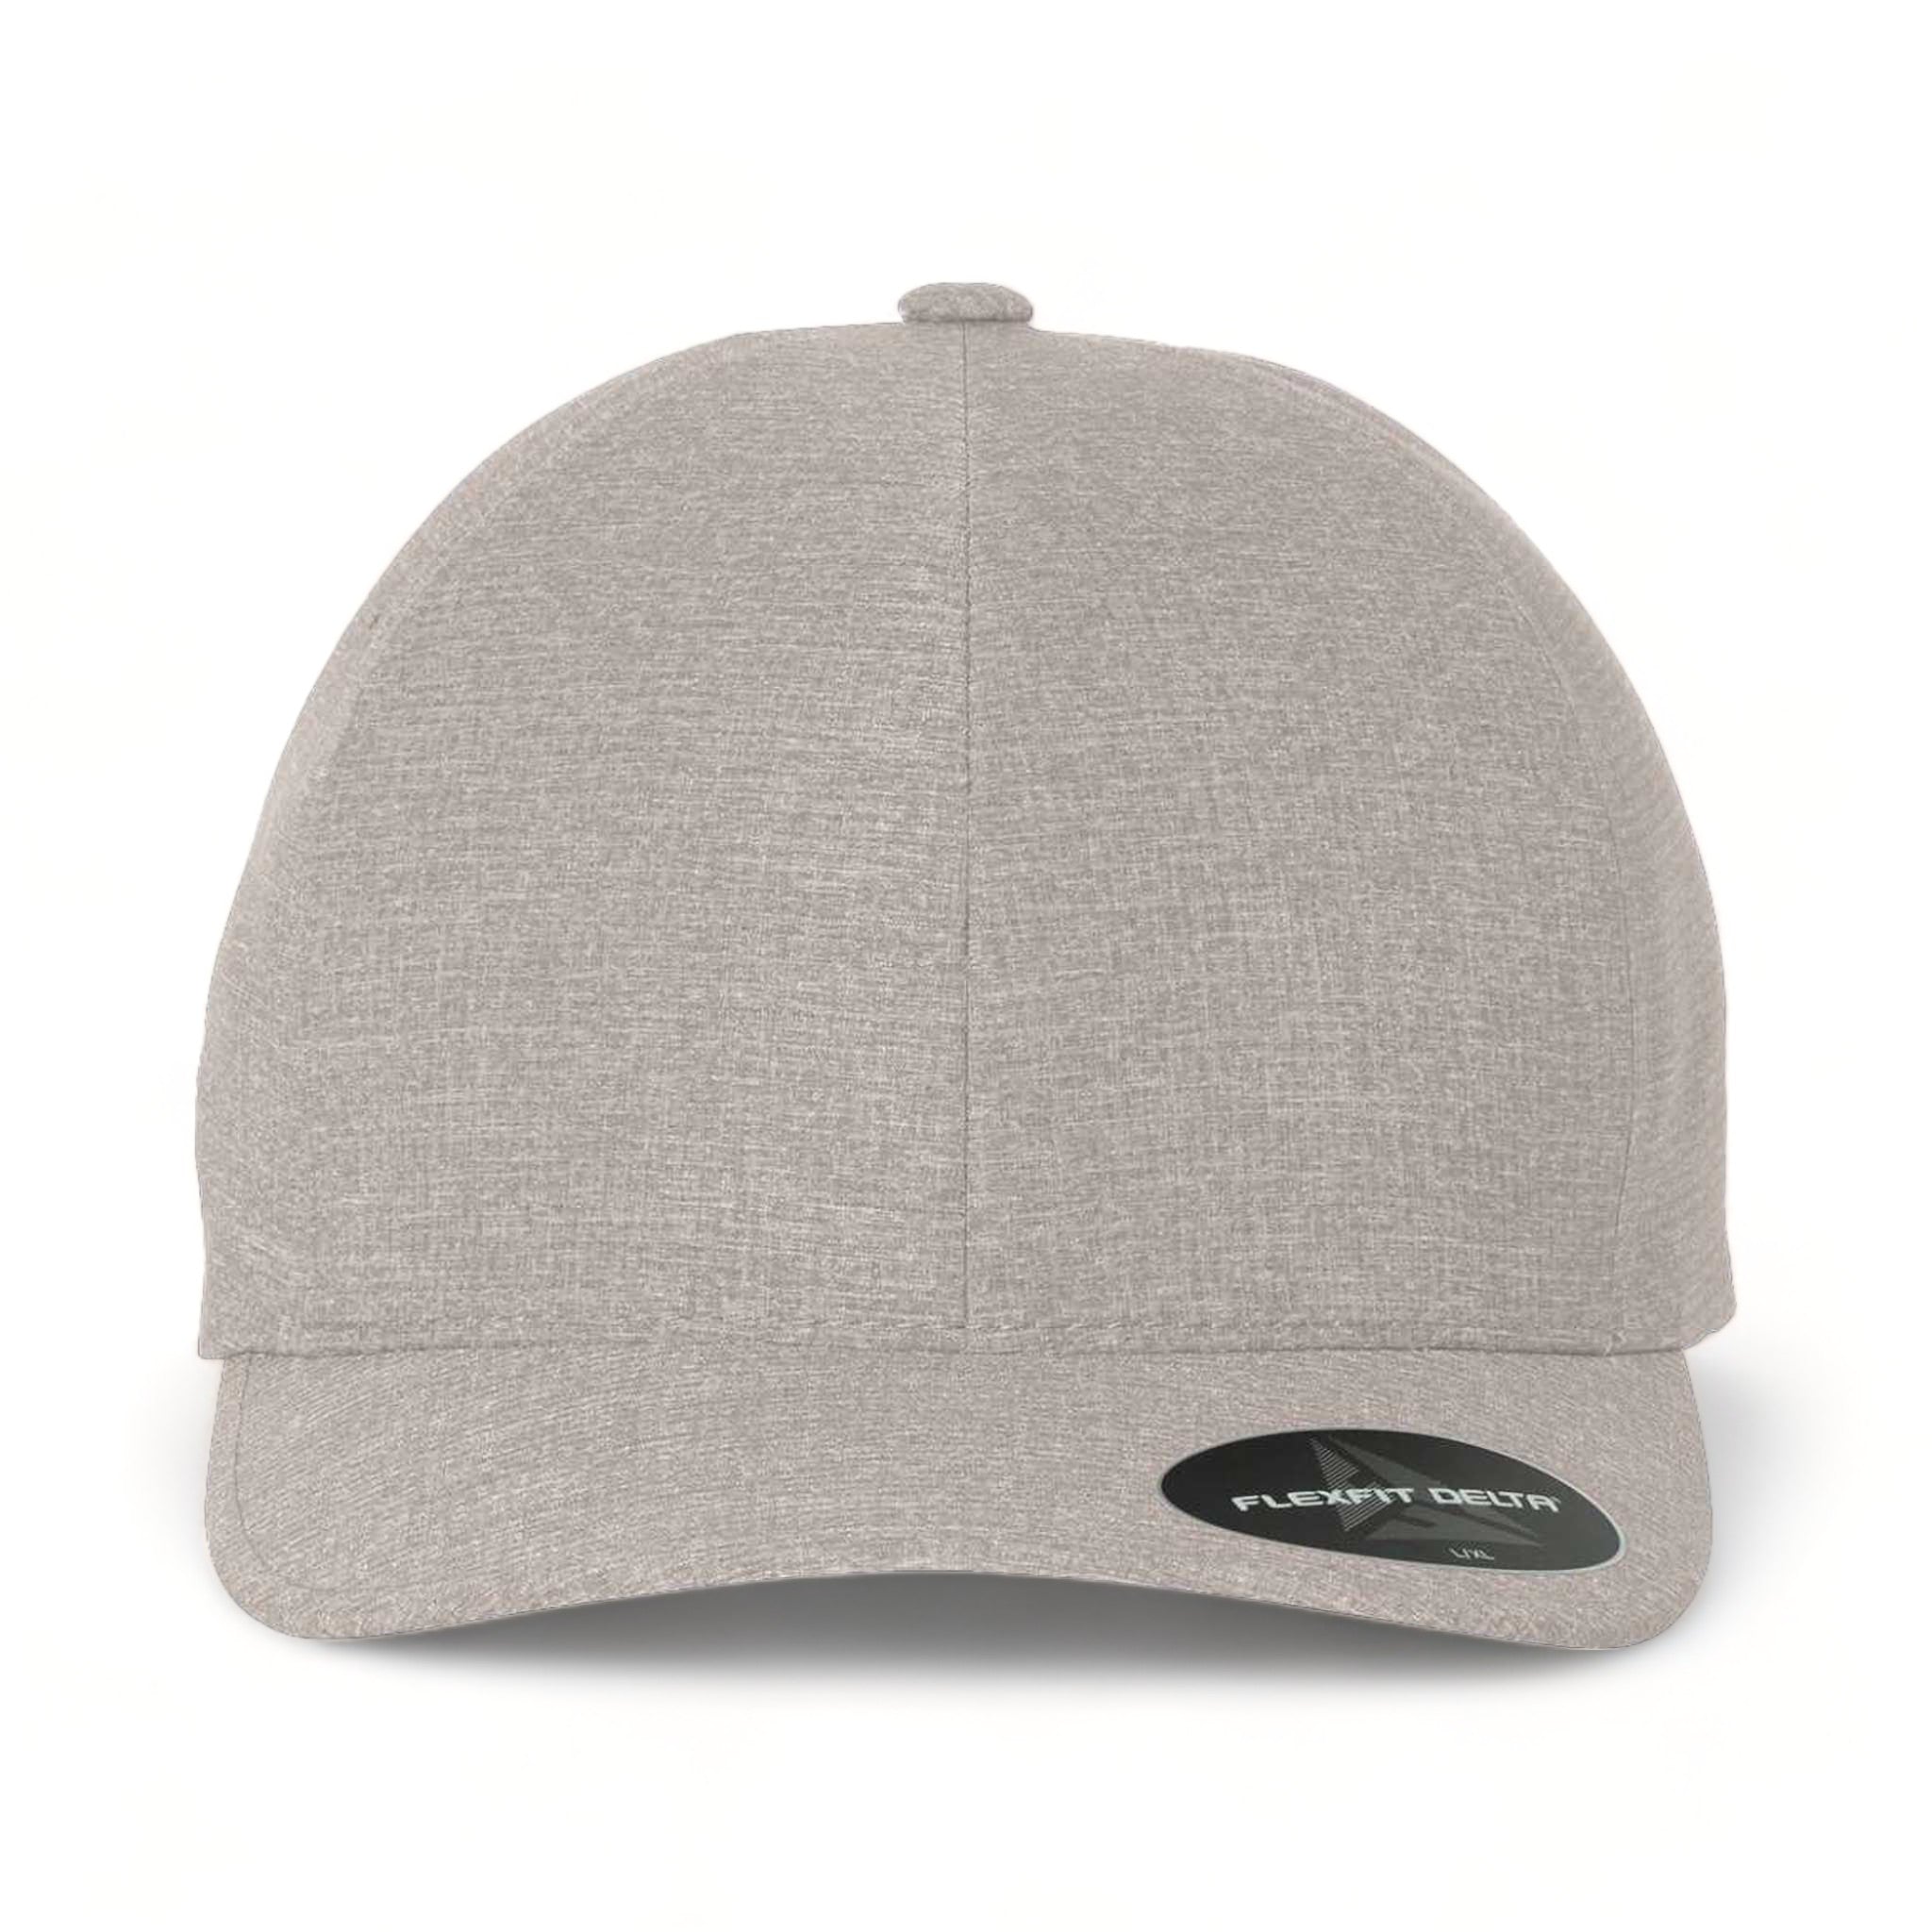 Front view of Flexfit 180 custom hat in mélange silver